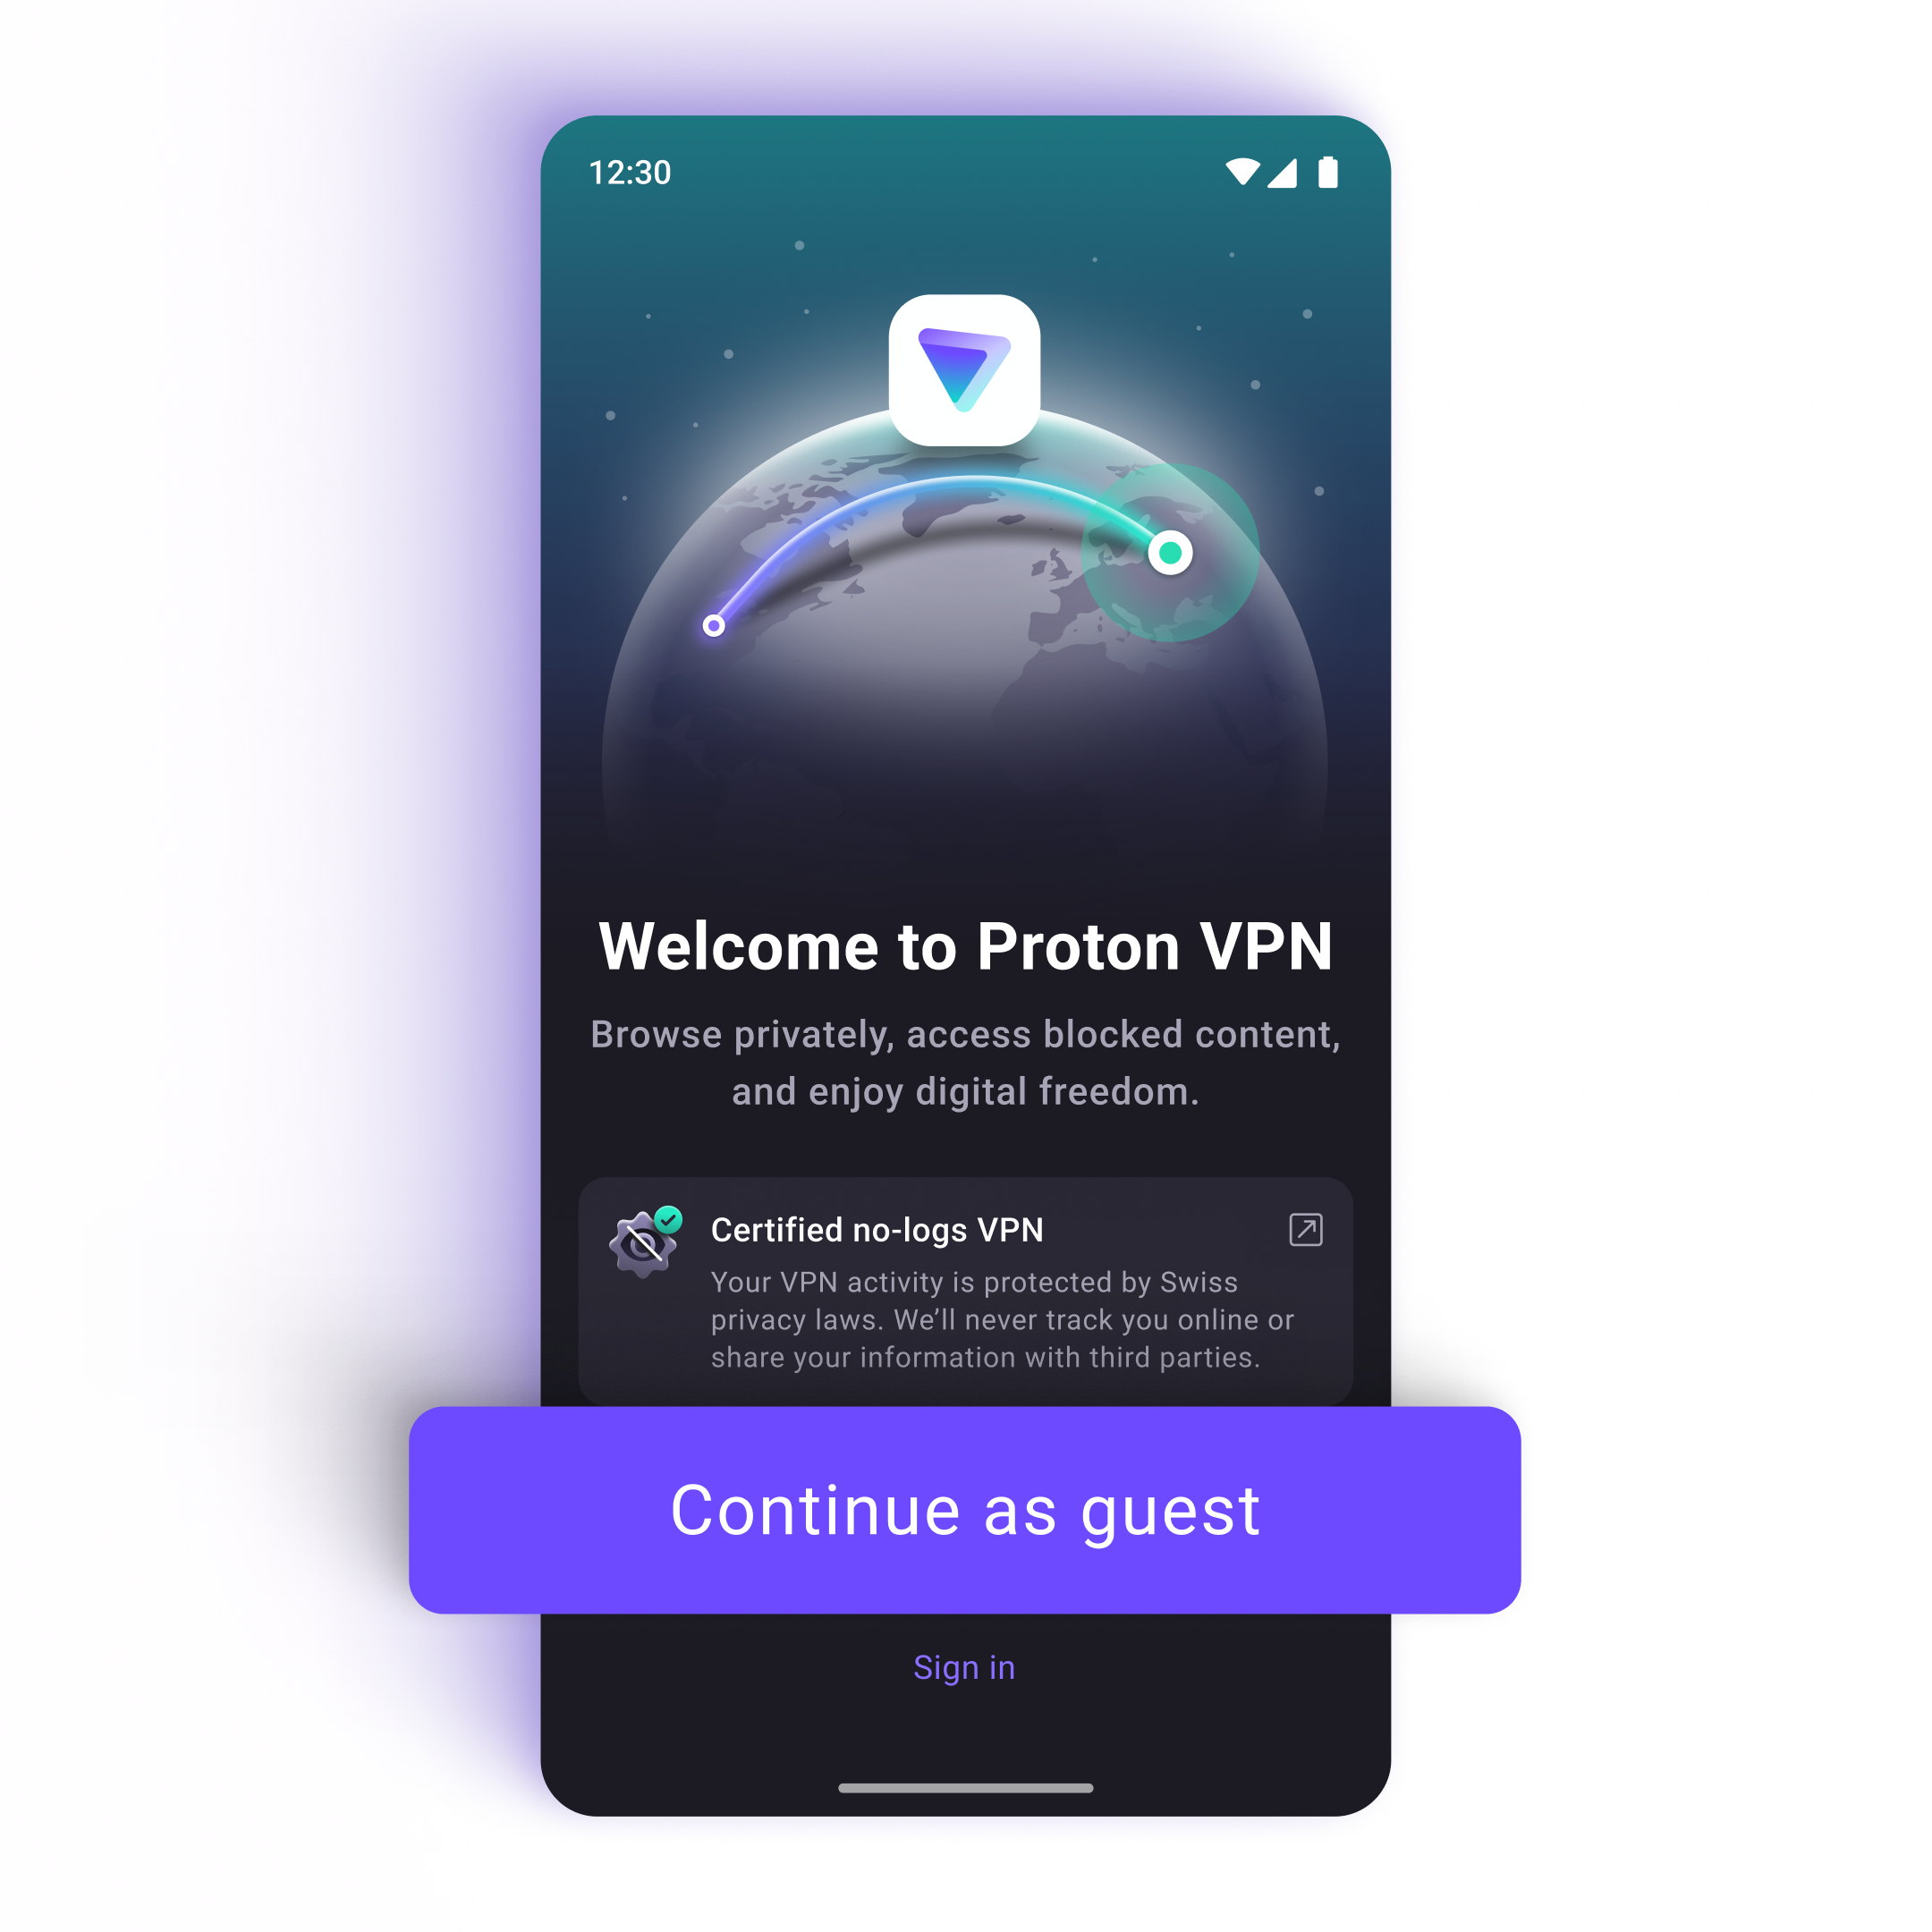 Proton VPN credential-less login interface on Android device